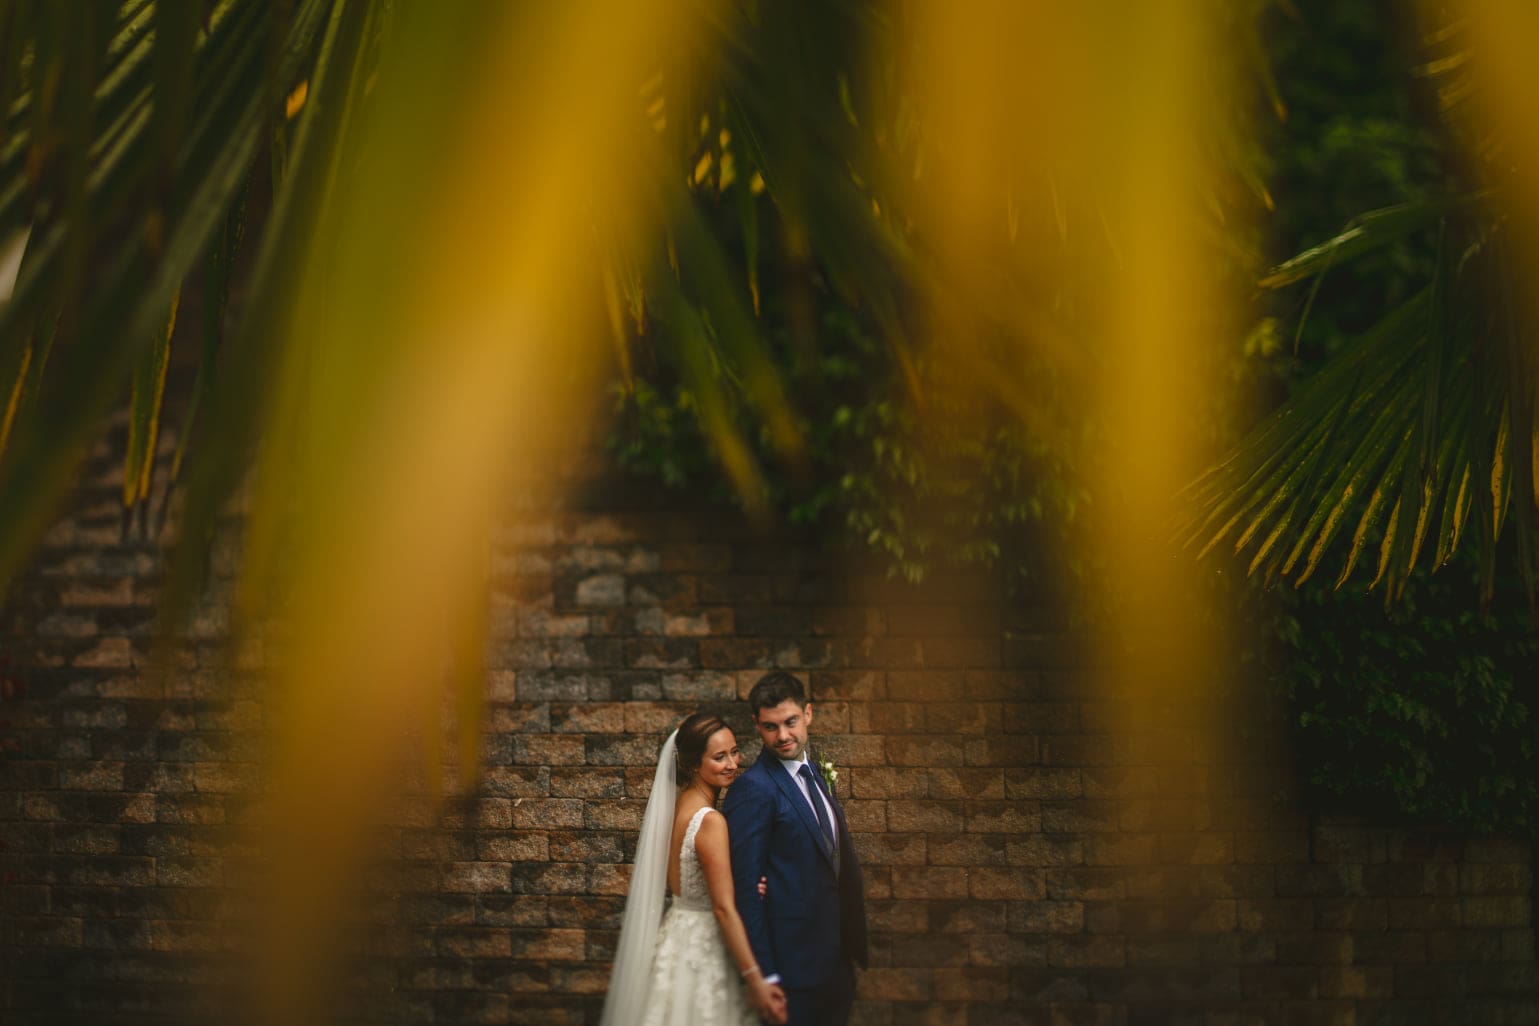 A bride and groom standing in front of a palm tree.